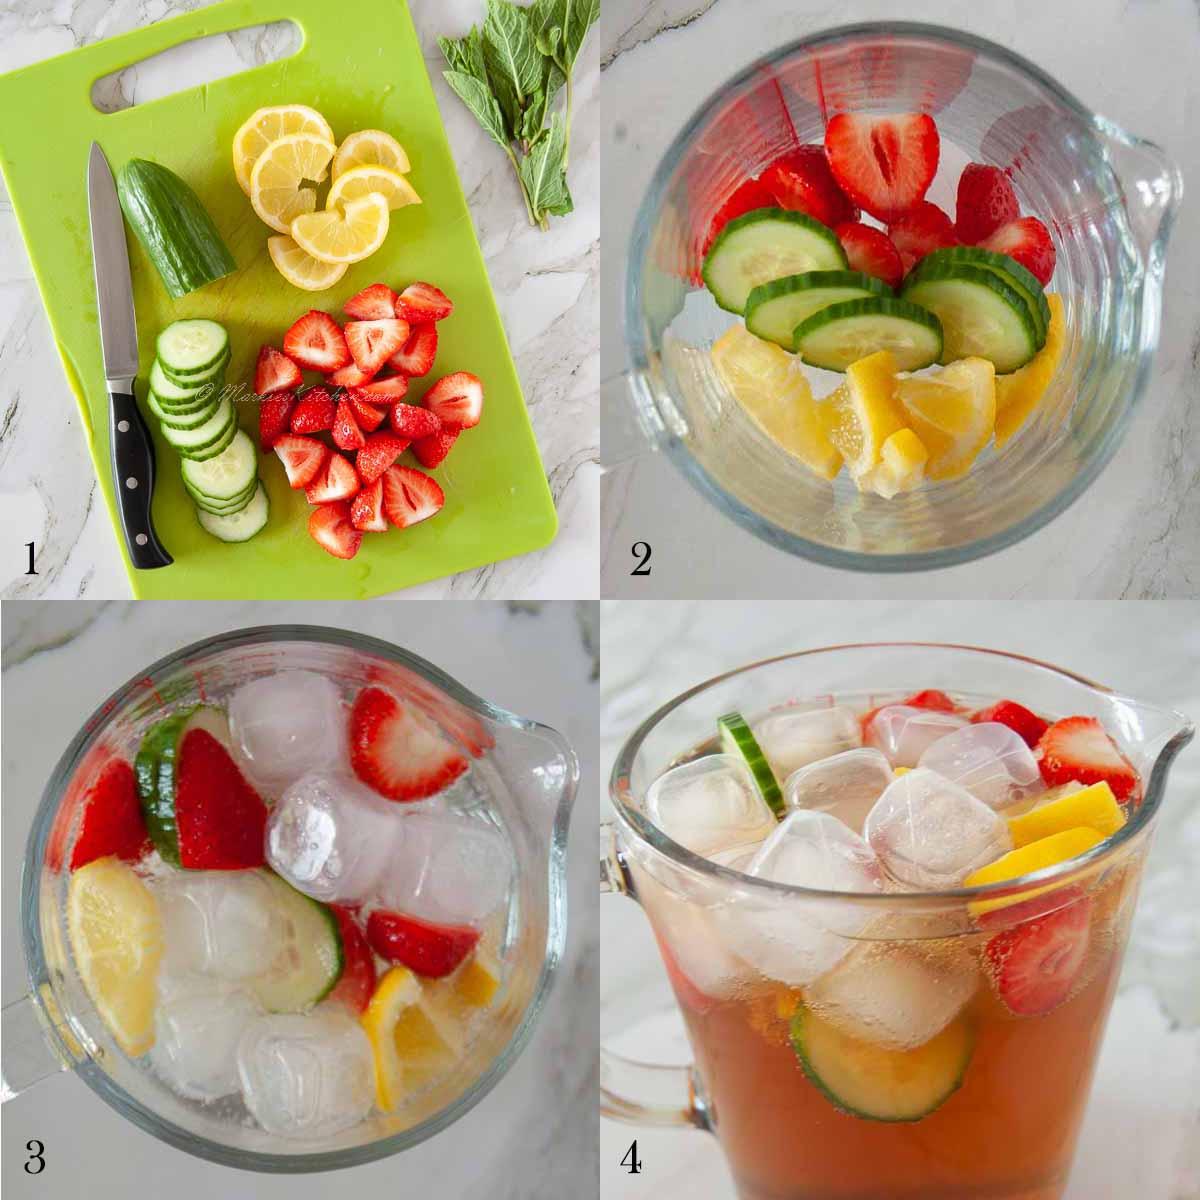 A collage of four photos showing how to make Pimm's without alcohol: cut the fruit, add the fruit and ice into a jug, add lemonade, add balsamic vinegar.